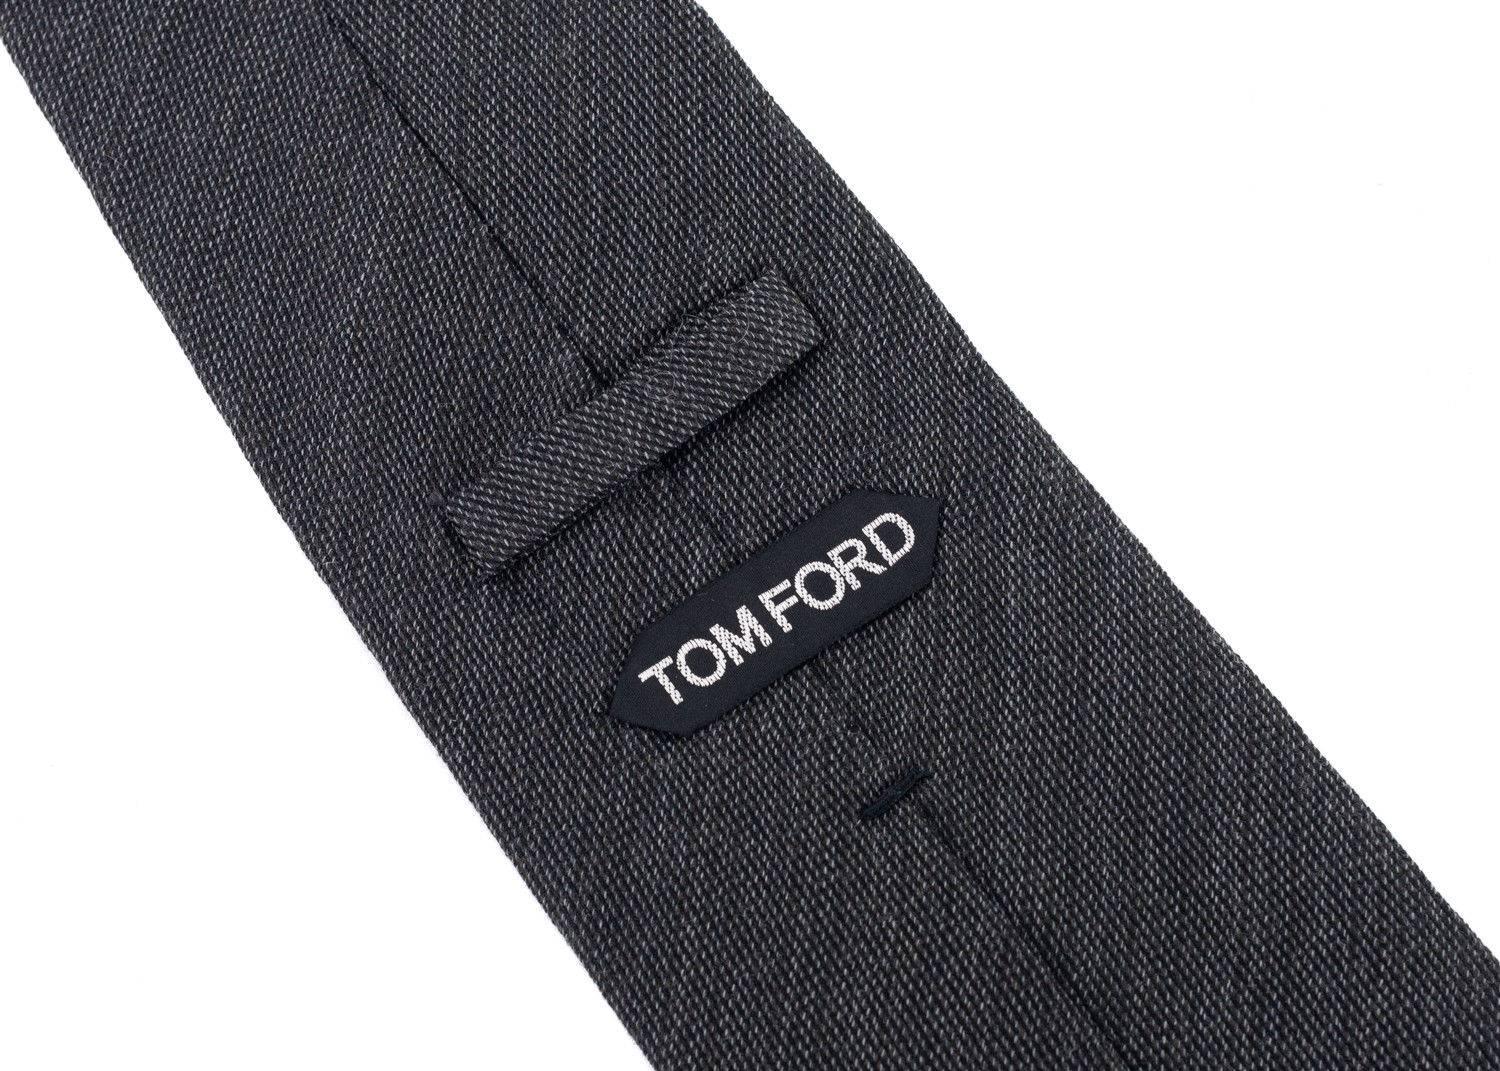 Italian luxury brand, Tom Ford, has crafted these gorgeous Woven and Silk Tie for important special occasions and professional events. The tie is great to pair with your favorite solid color button down and blazers with your chosen pair or classic